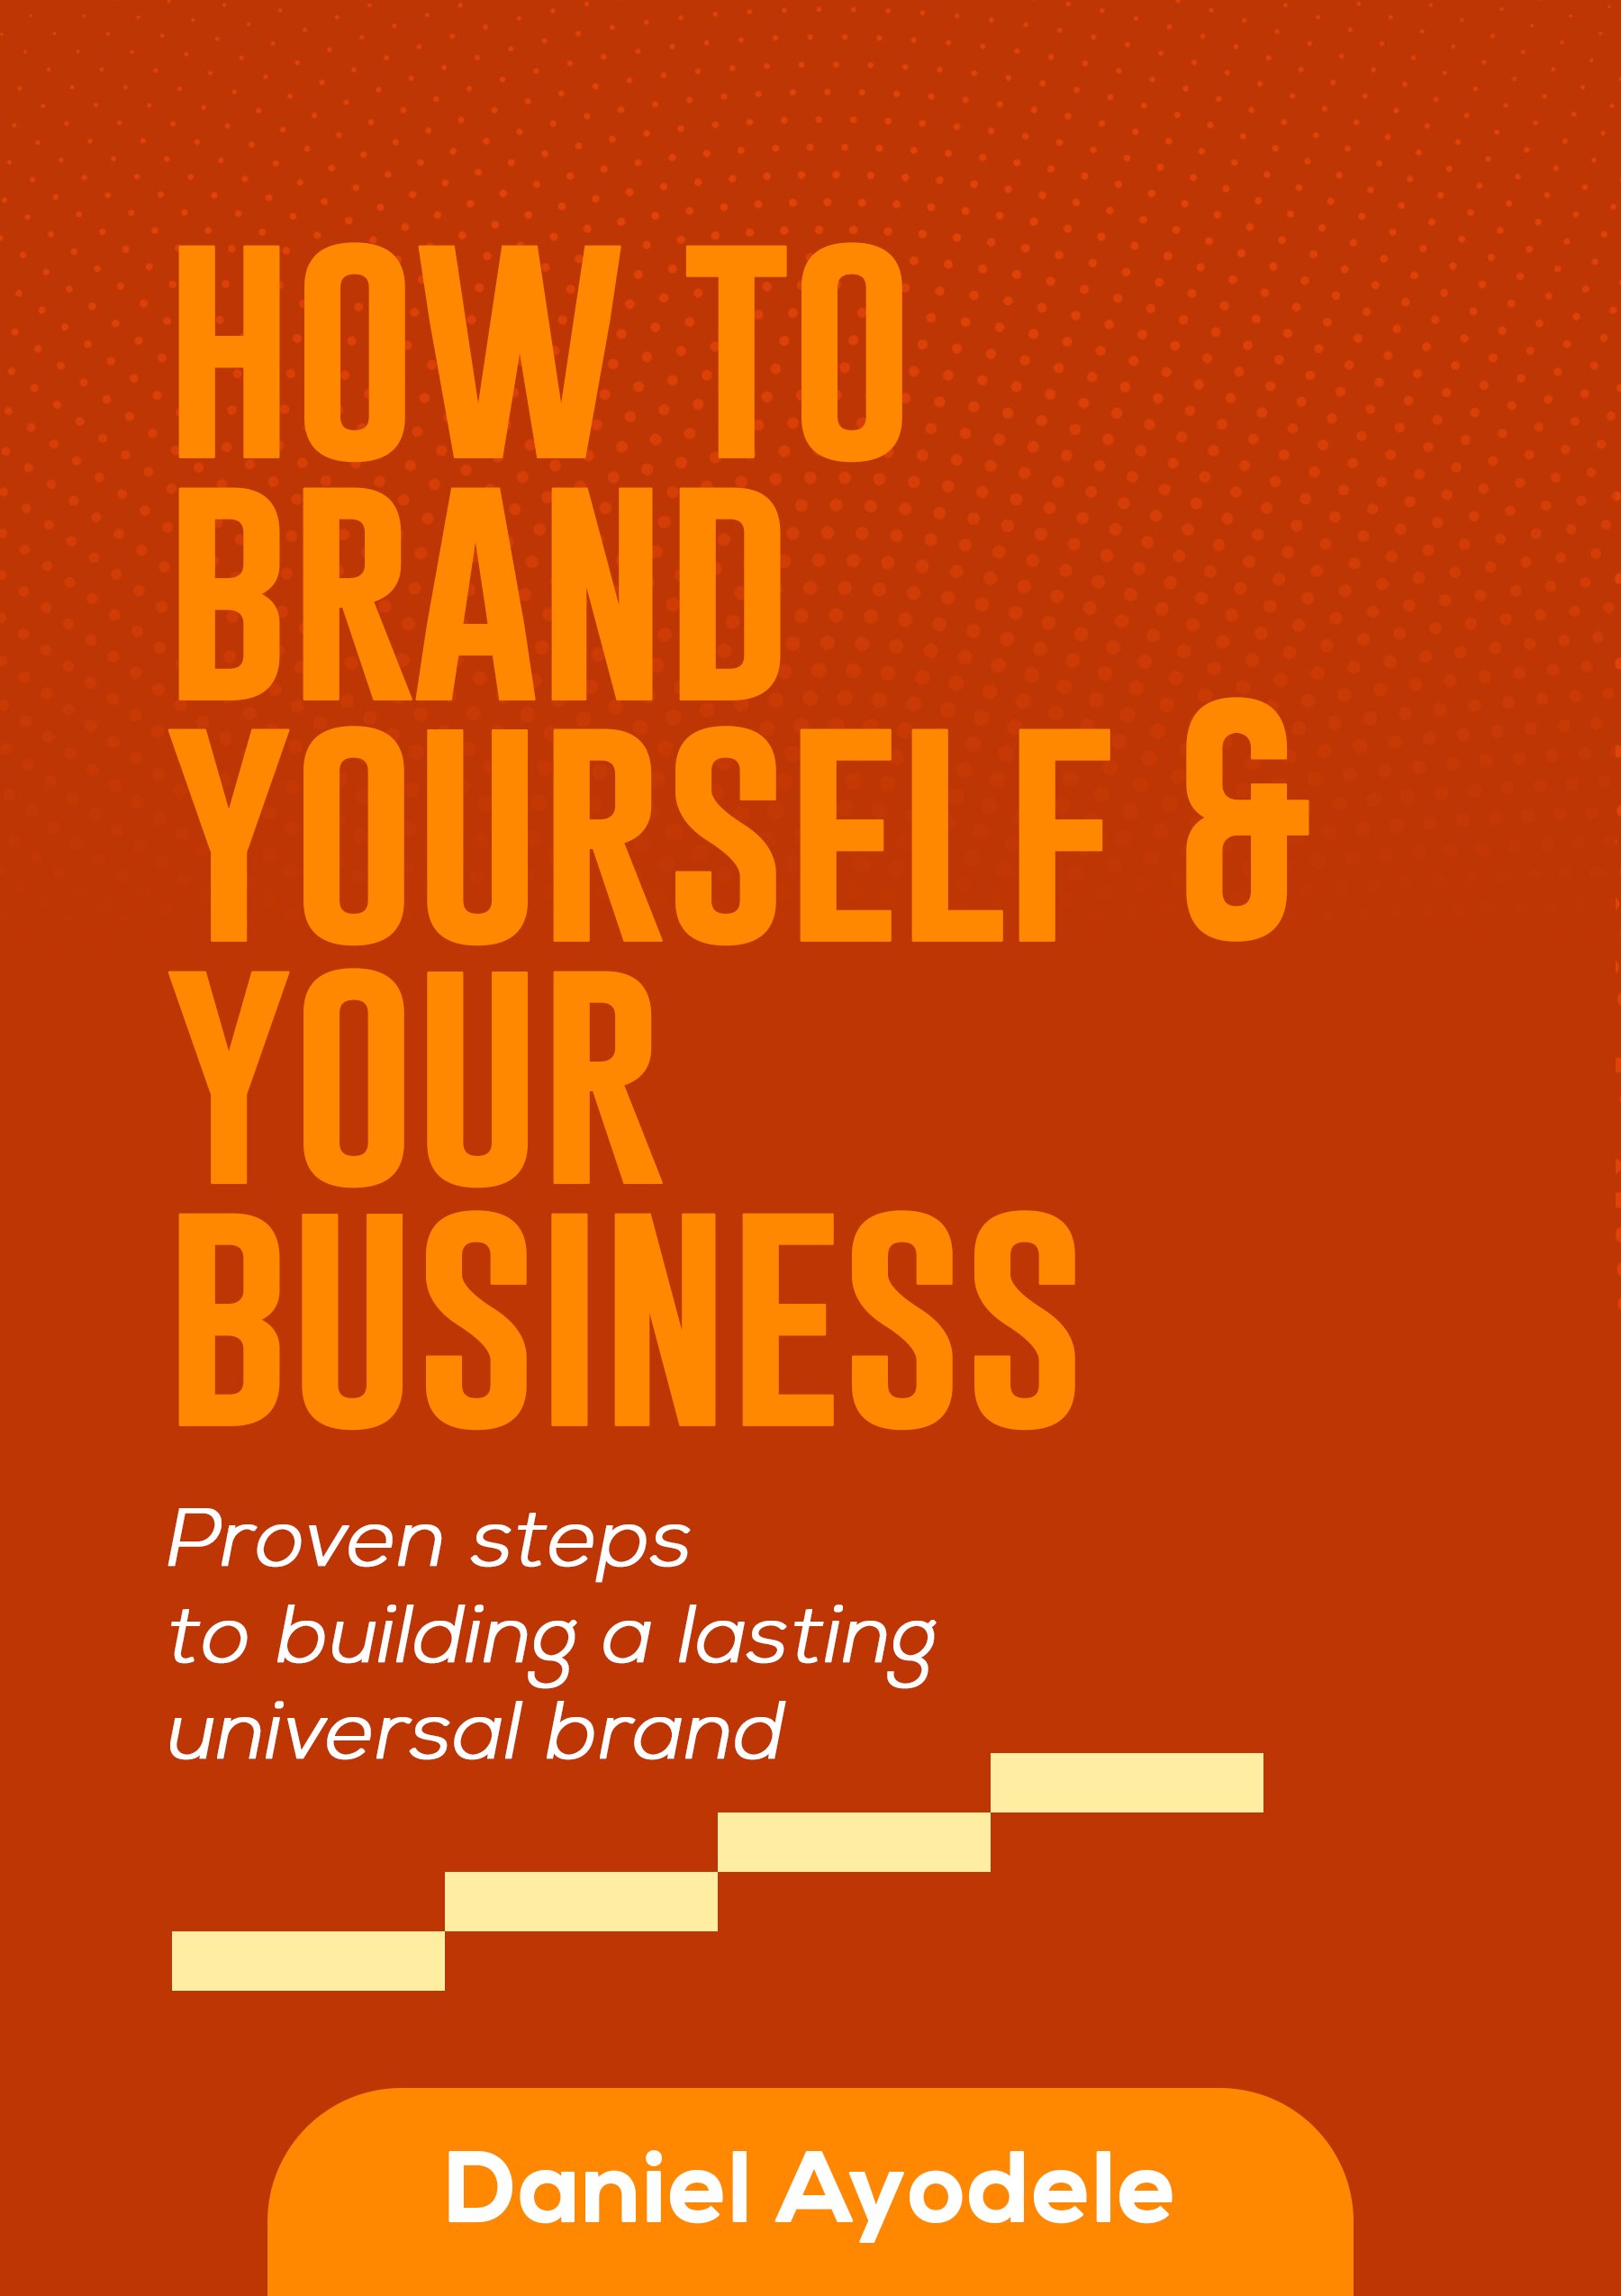 How-to-Brand-Yourself-and-Your-Business